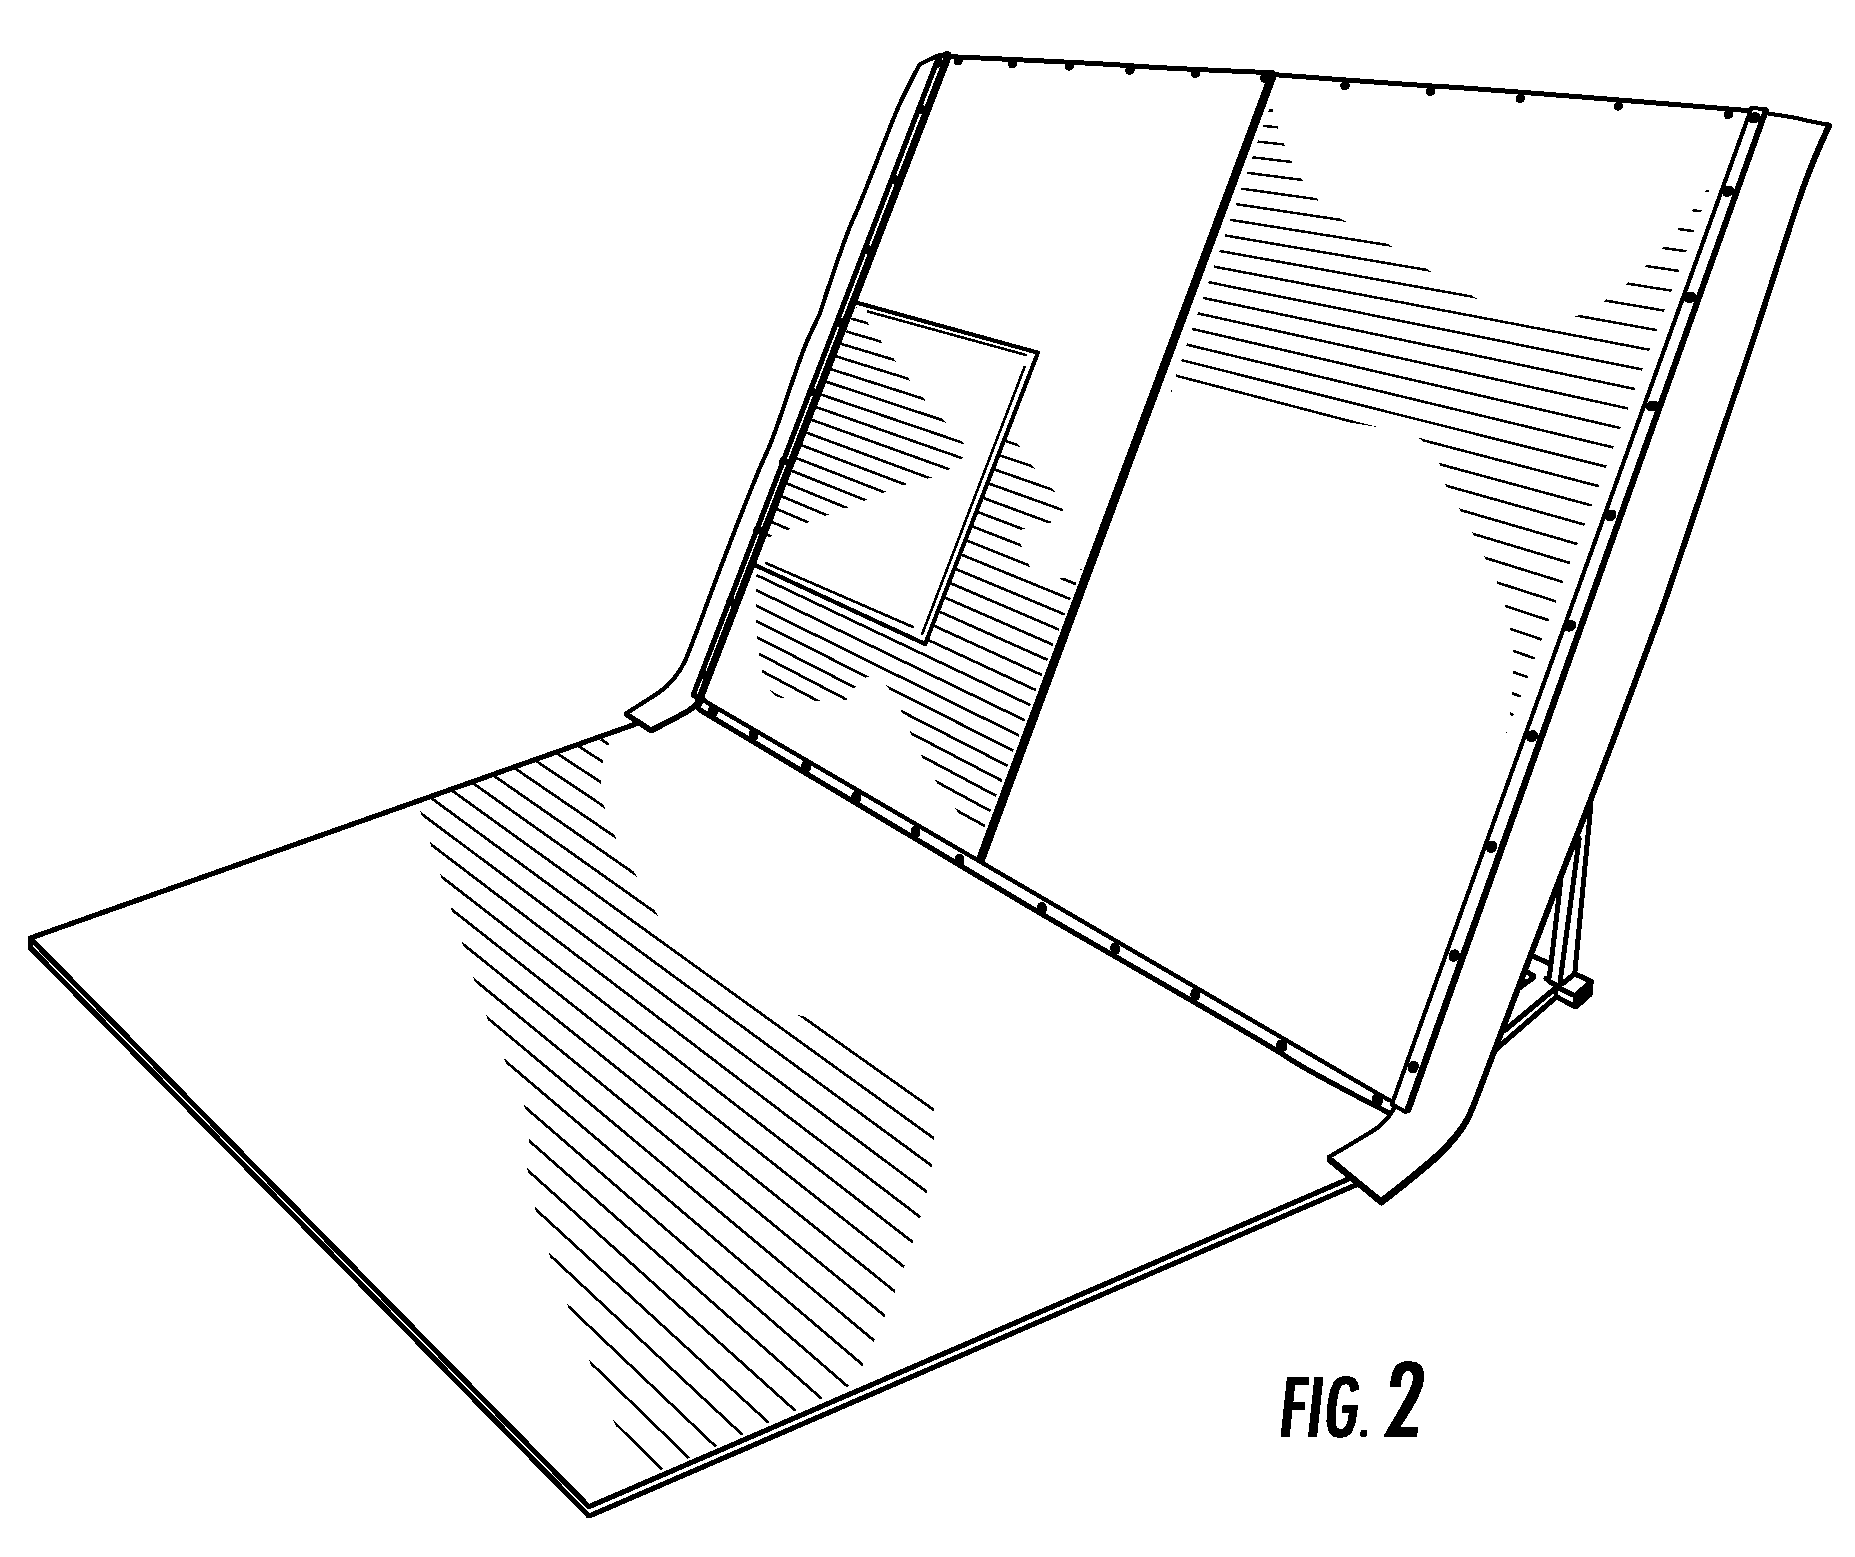 Moving headboard trailer ejector and floor cleaning apparatus